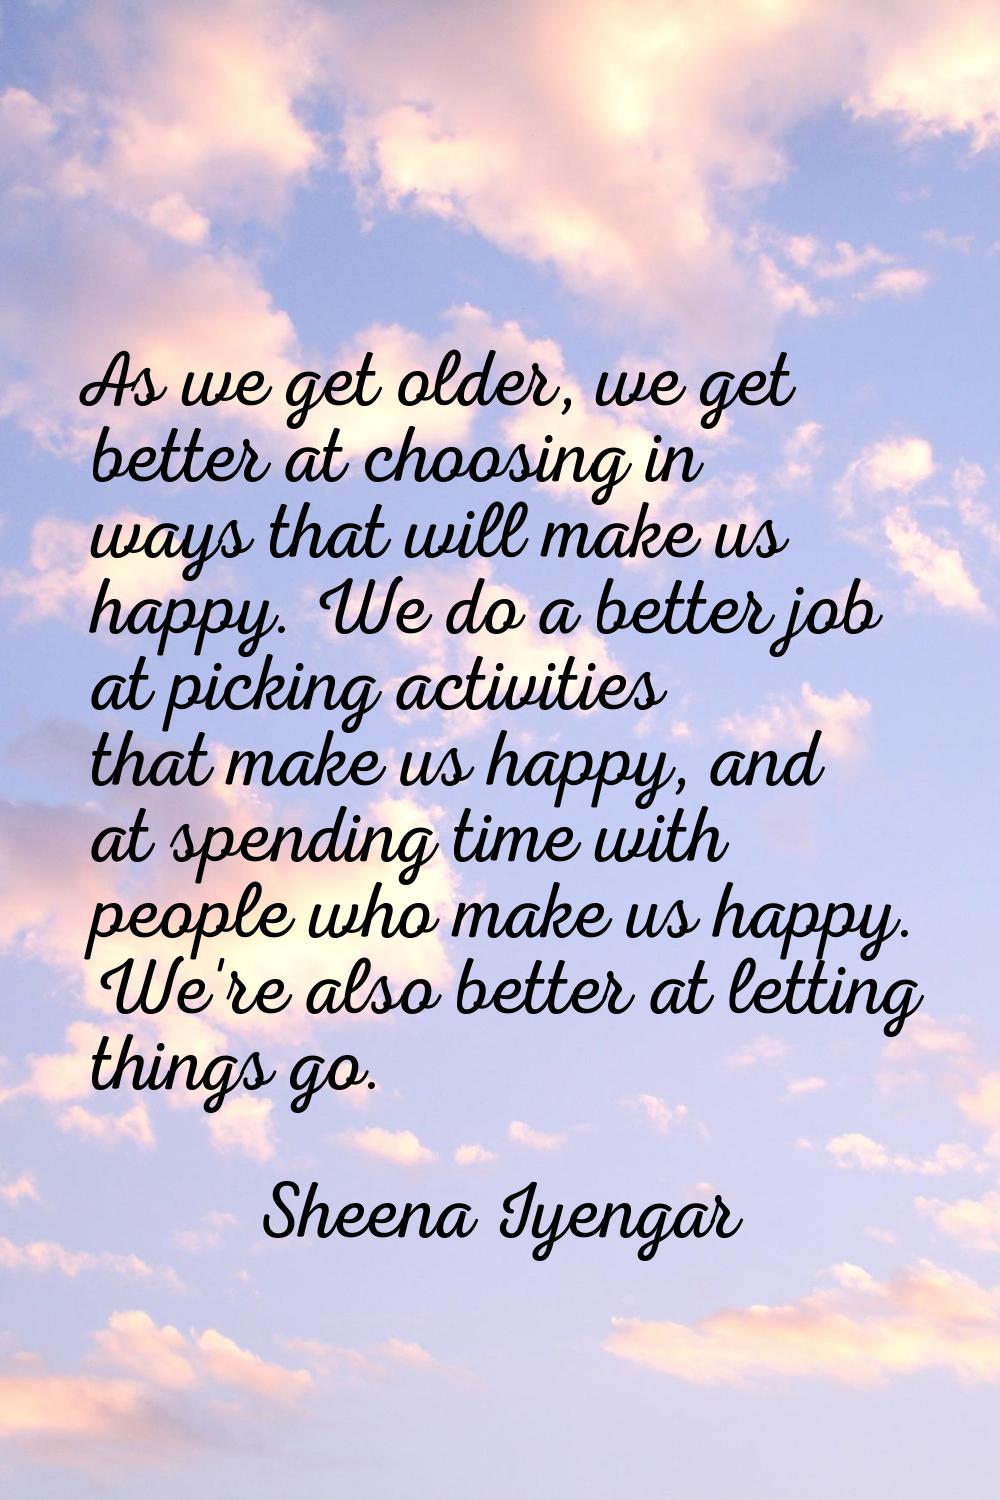 As we get older, we get better at choosing in ways that will make us happy. We do a better job at p